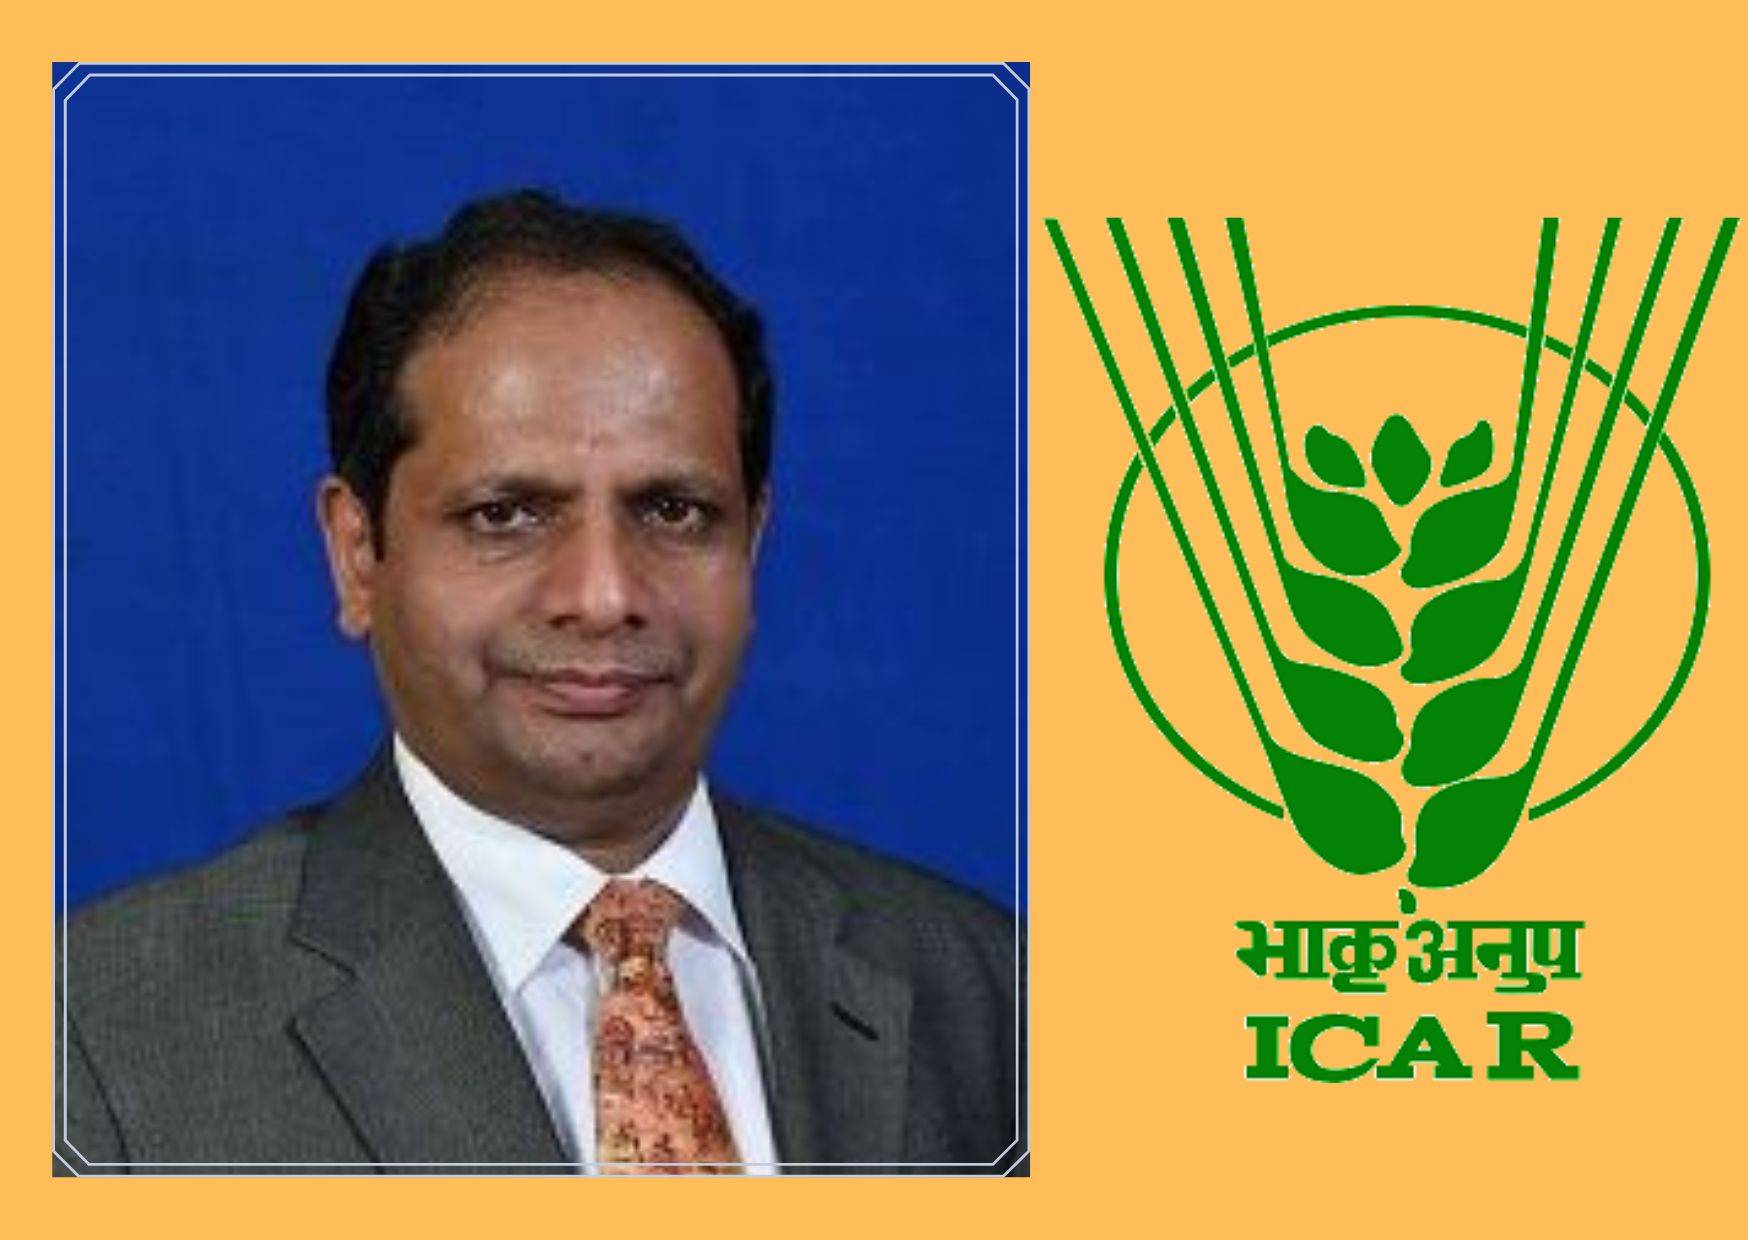 Himanshu Pathak appointed Director General of Indian Council of Agriculture Research